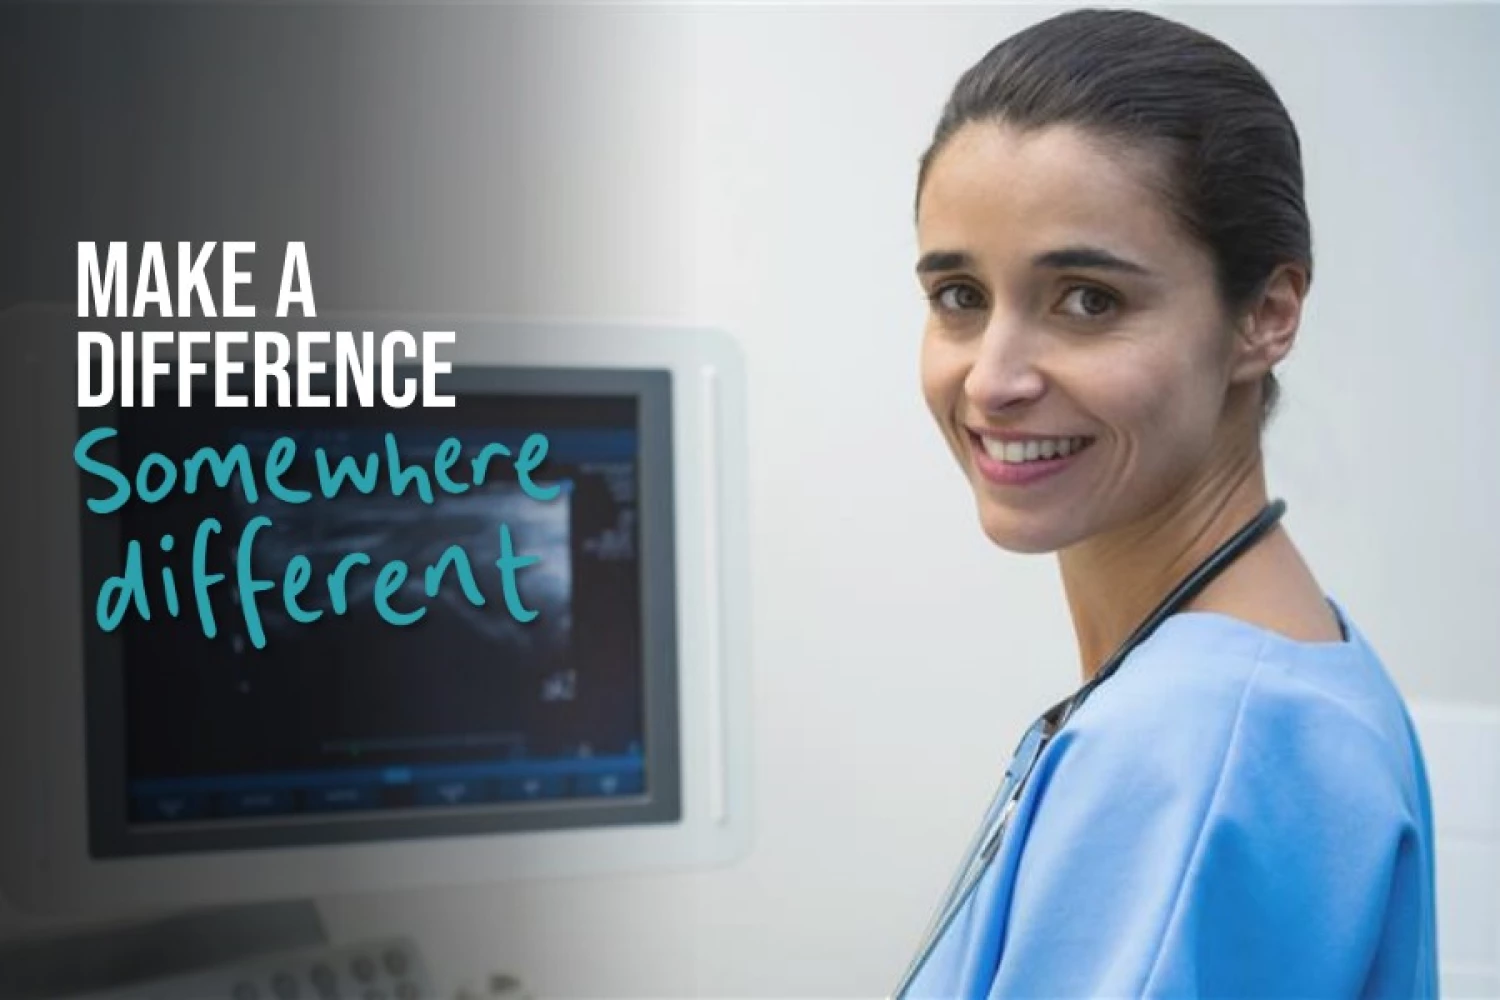 Cardiac Sonography Make a Difference Somewhere Different